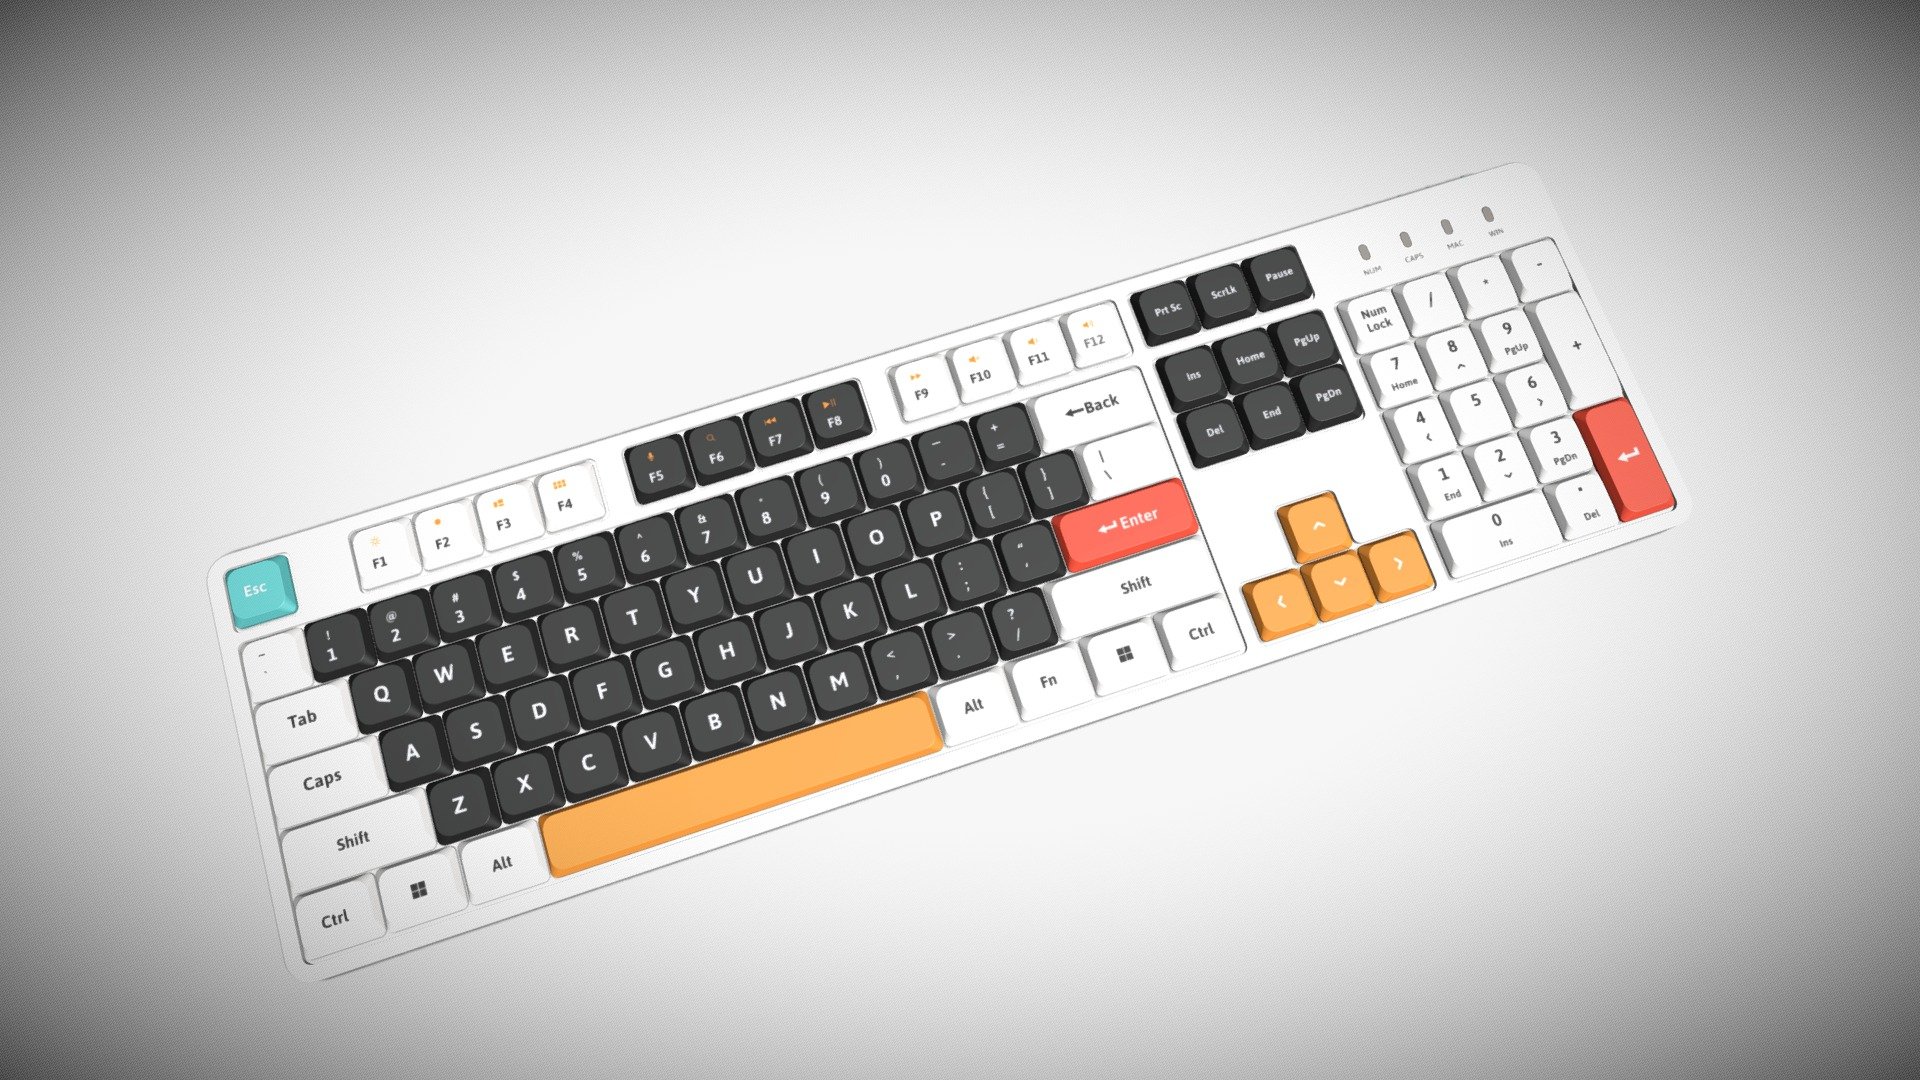 Detailed model of a white Full Size Keyboard, modeled in Cinema 4D.The model was created using approximate real world dimensions.

The model has 68,395 polys and 68,624 vertices.

An additional file has been provided containing the original Cinema 4D project files with both standard and v-ray materials, textures and other 3d export files such as 3ds, fbx and obj 3d model